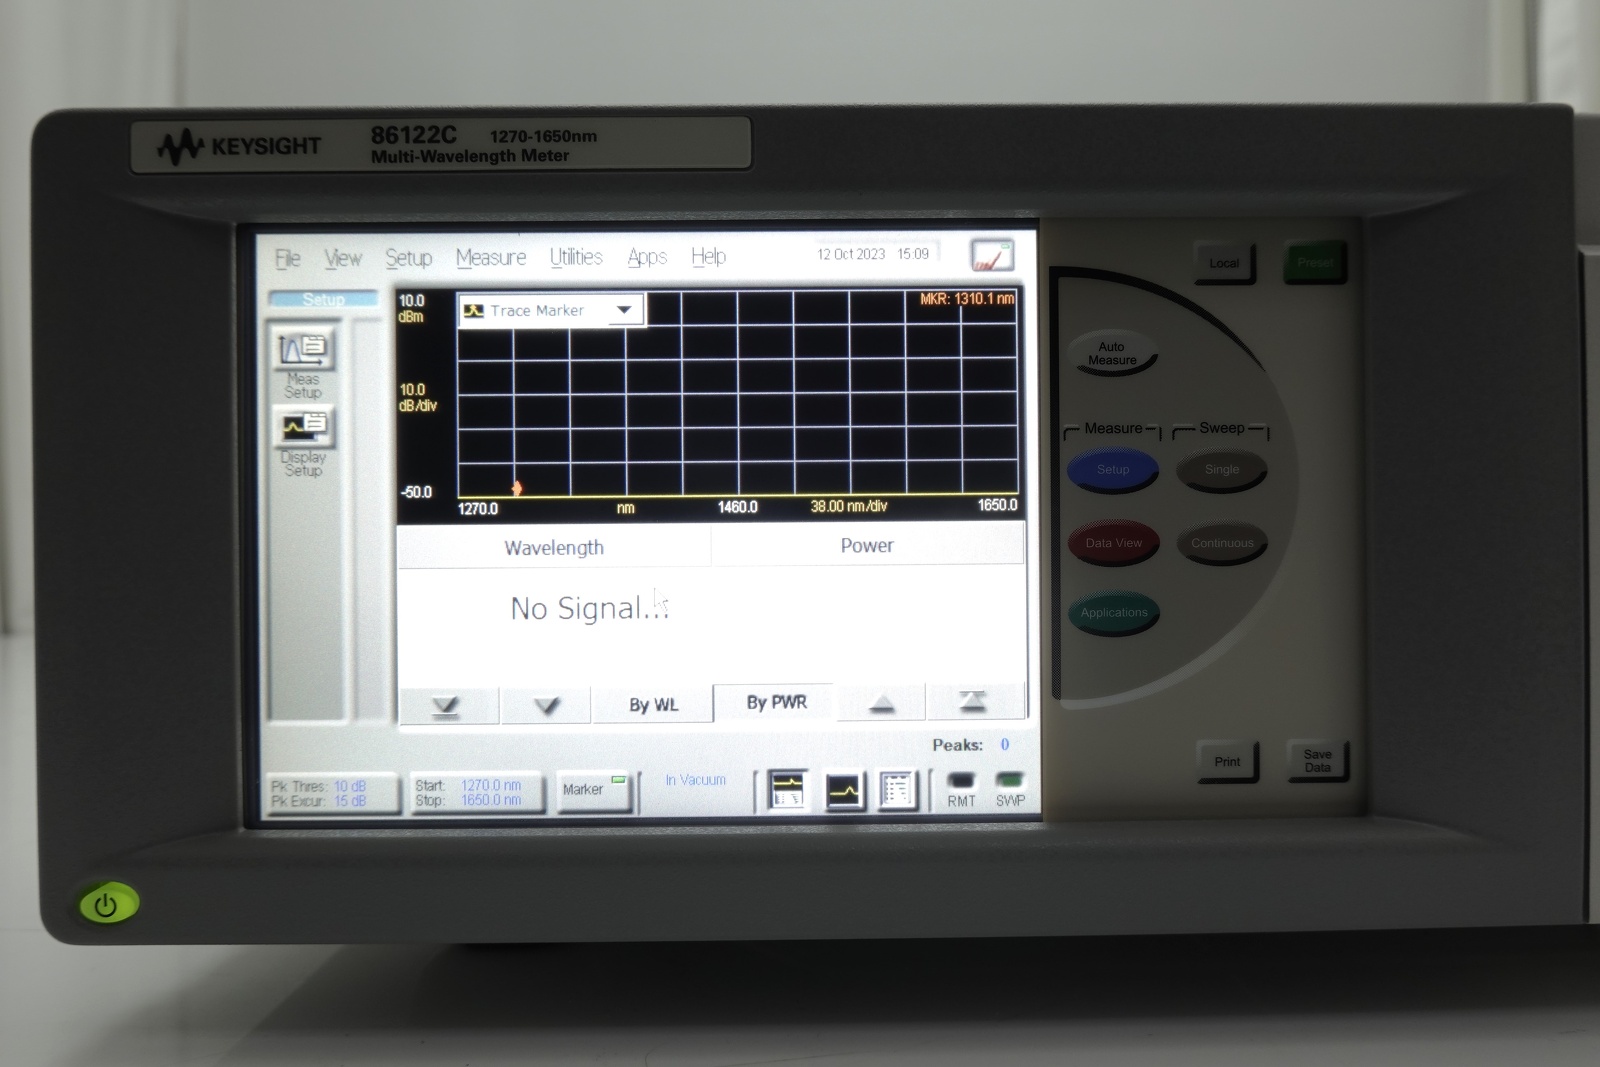 Keysight 86122C-110 Wavelengths 1270 nm to 1650 nm / Fast Update / +/-0.2 ppm (Updated version of option 100)